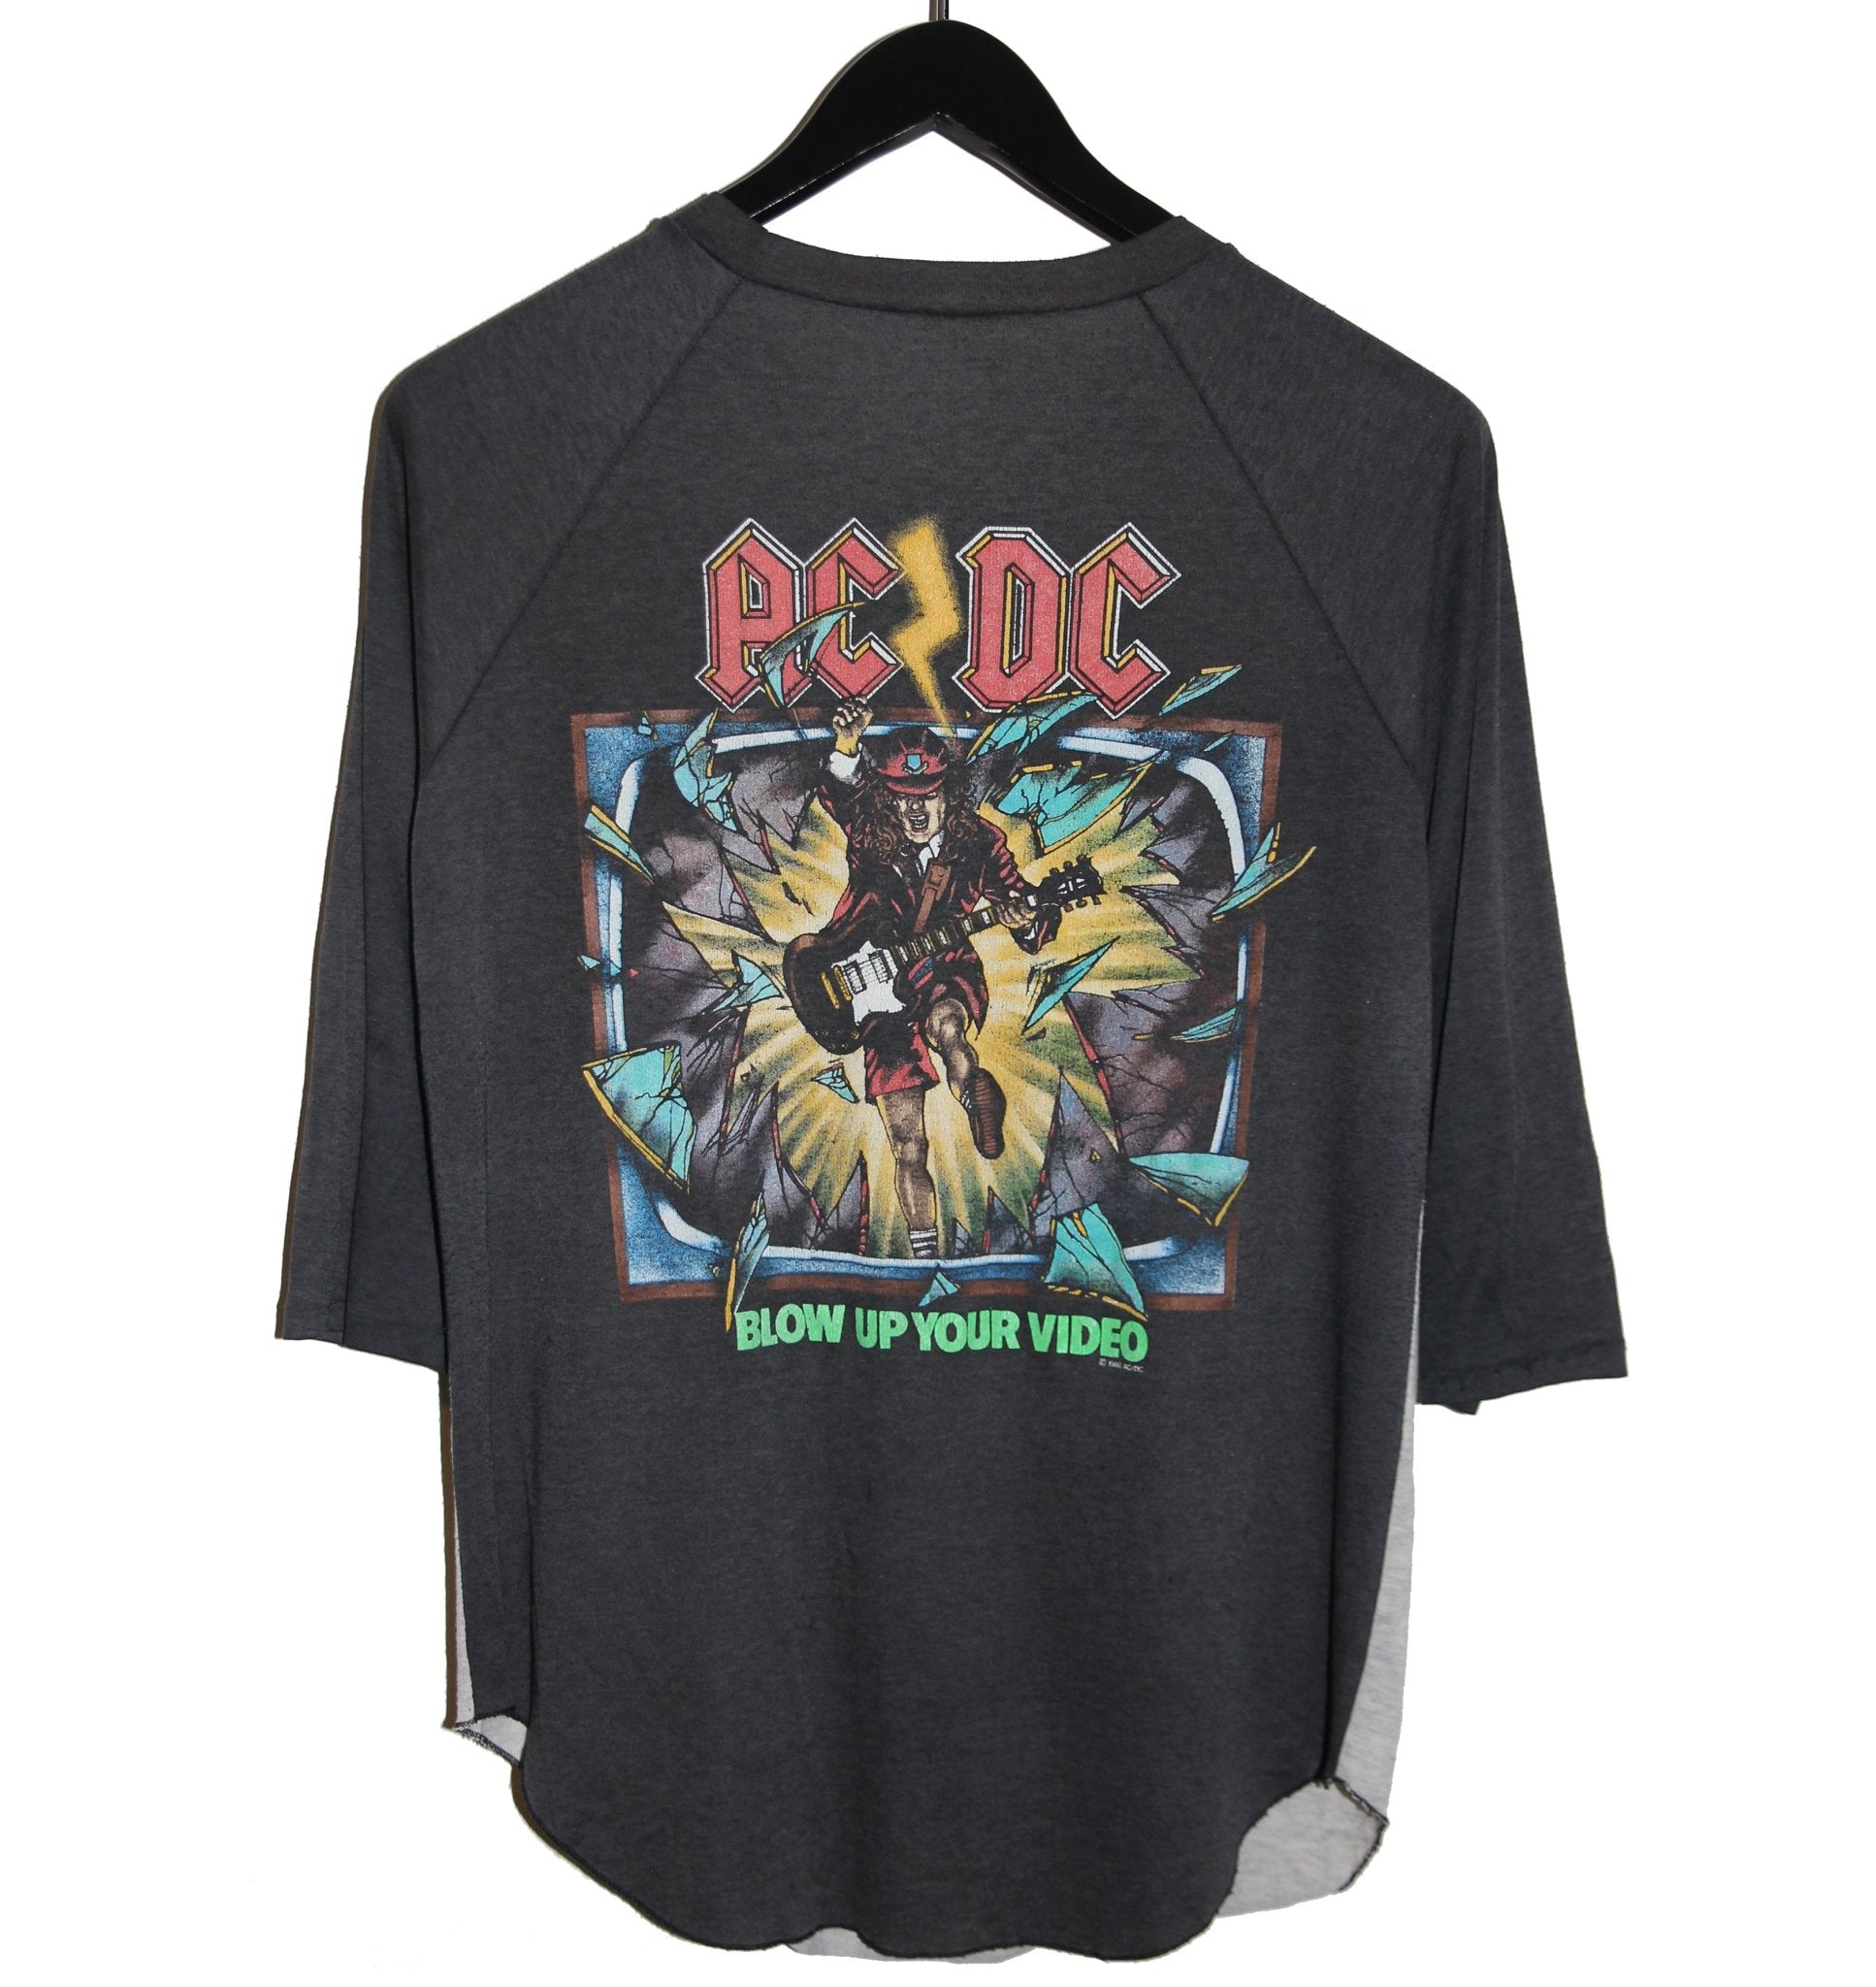 ACDC 1988 Blow Up Your Video Album Raglan - Faded AU